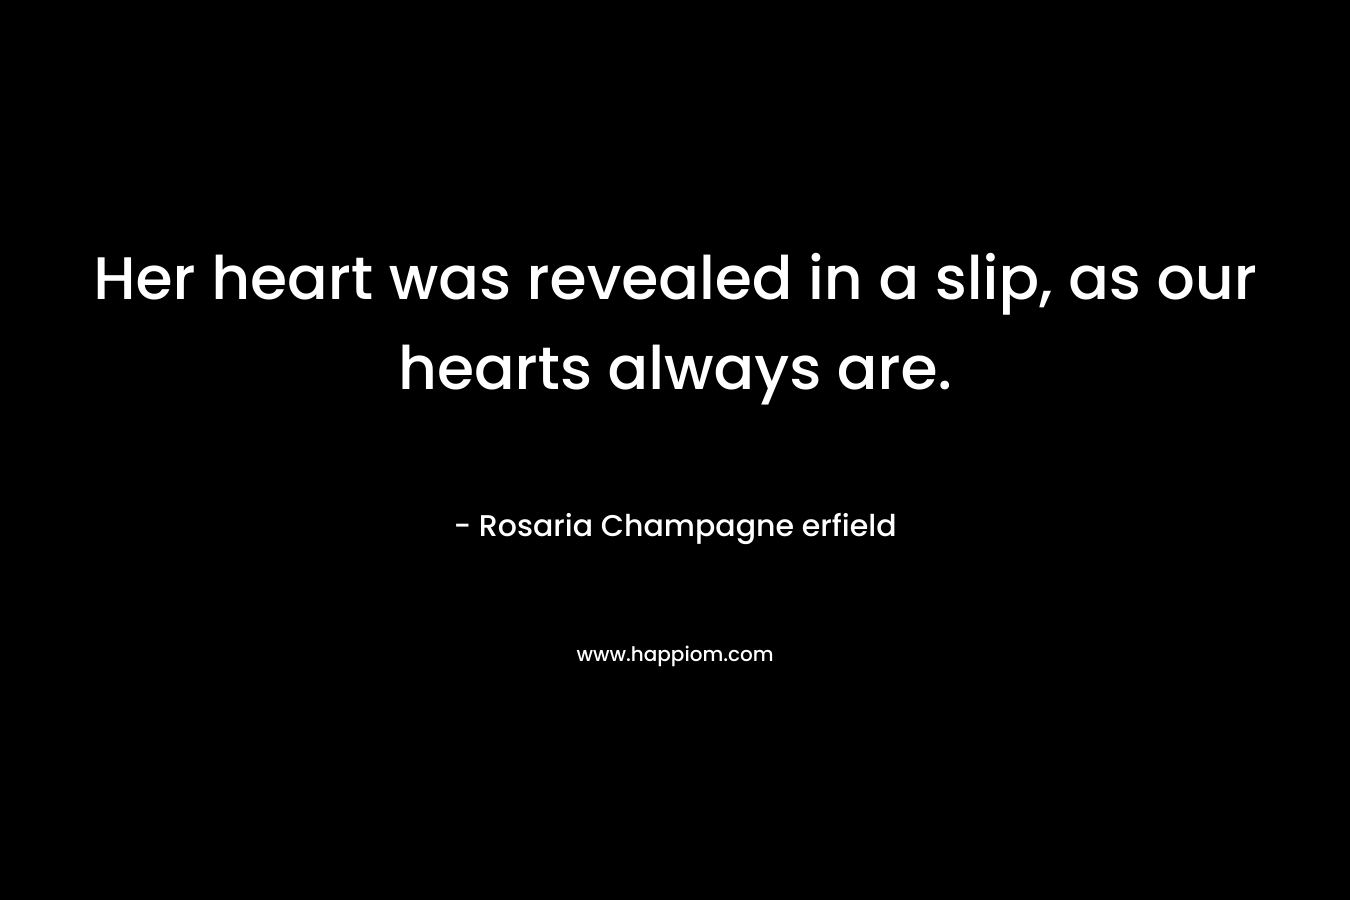 Her heart was revealed in a slip, as our hearts always are. – Rosaria Champagne erfield